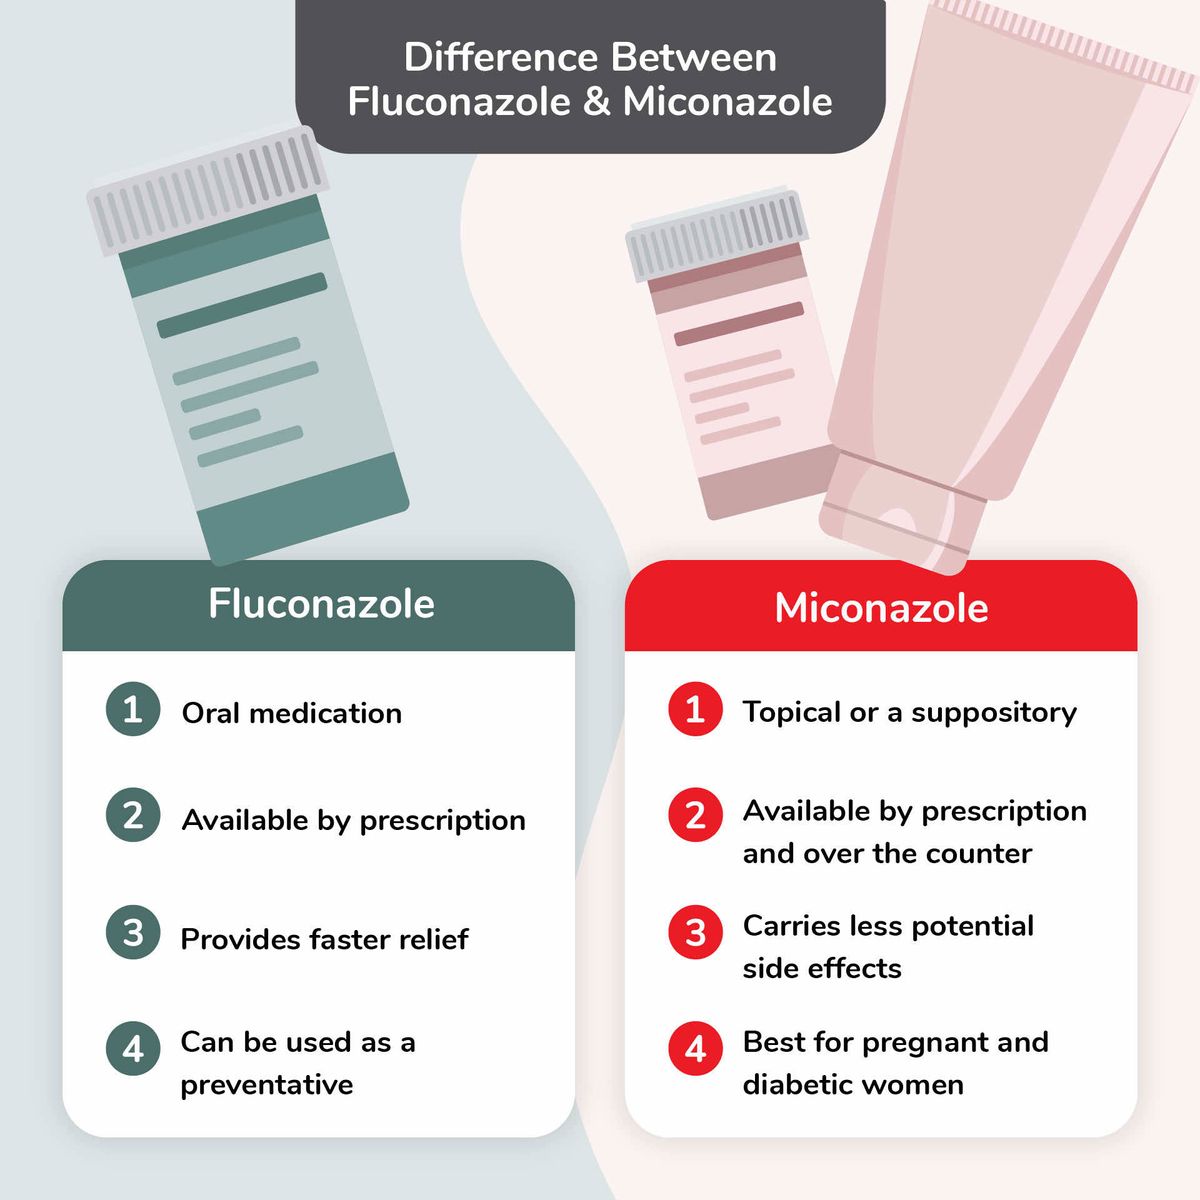 Illustration of the Differences Between Fluconazole and Miconazole